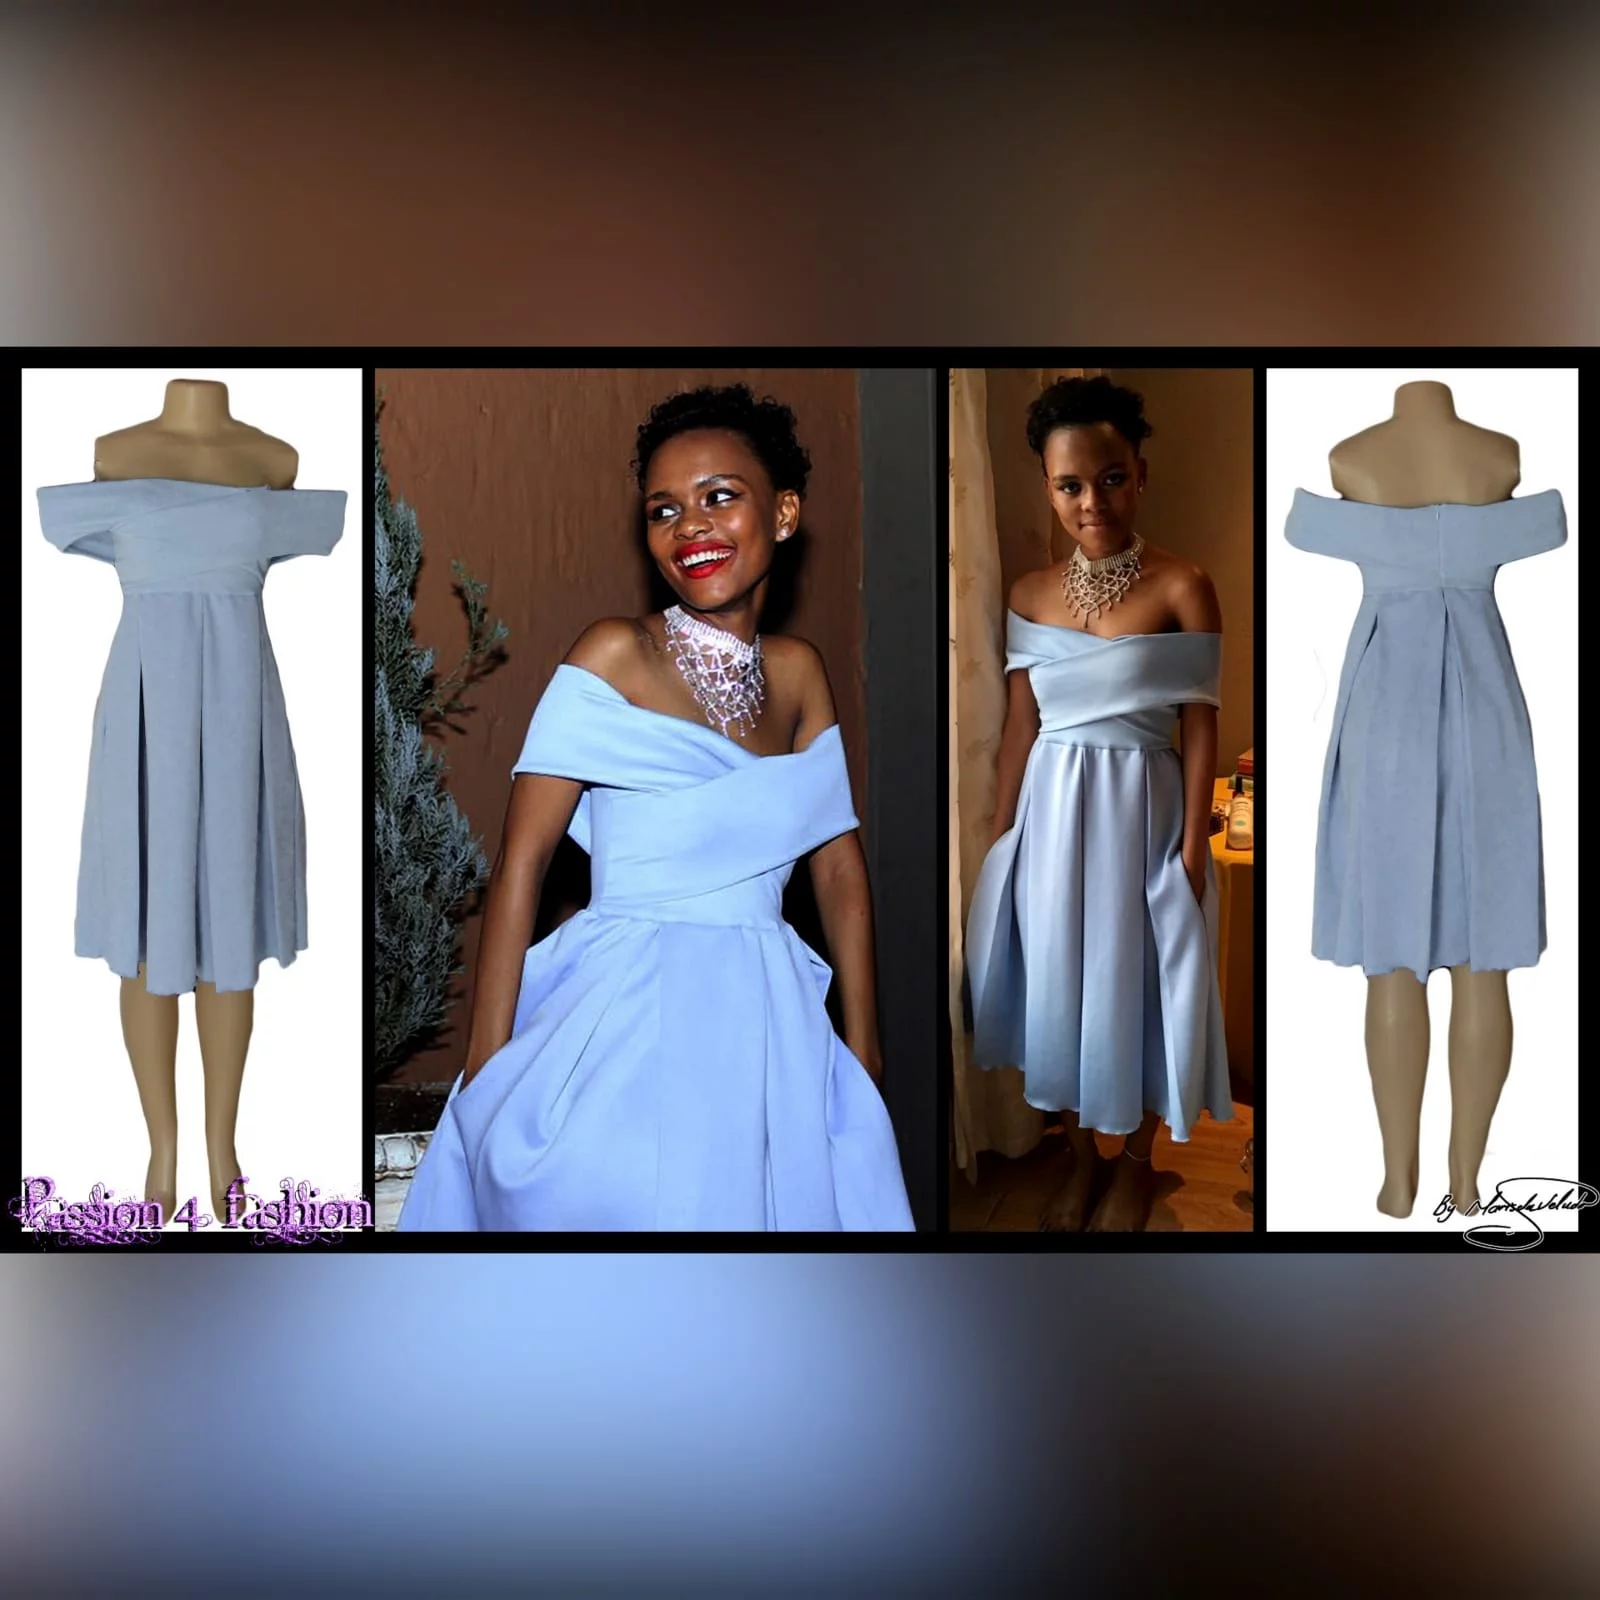 Short pale blue pleated cocktail dress 3 short pale blue pleated cocktail dress with a crossed bust design creating off shoulder short sleeves, pleated bottom with pockets.